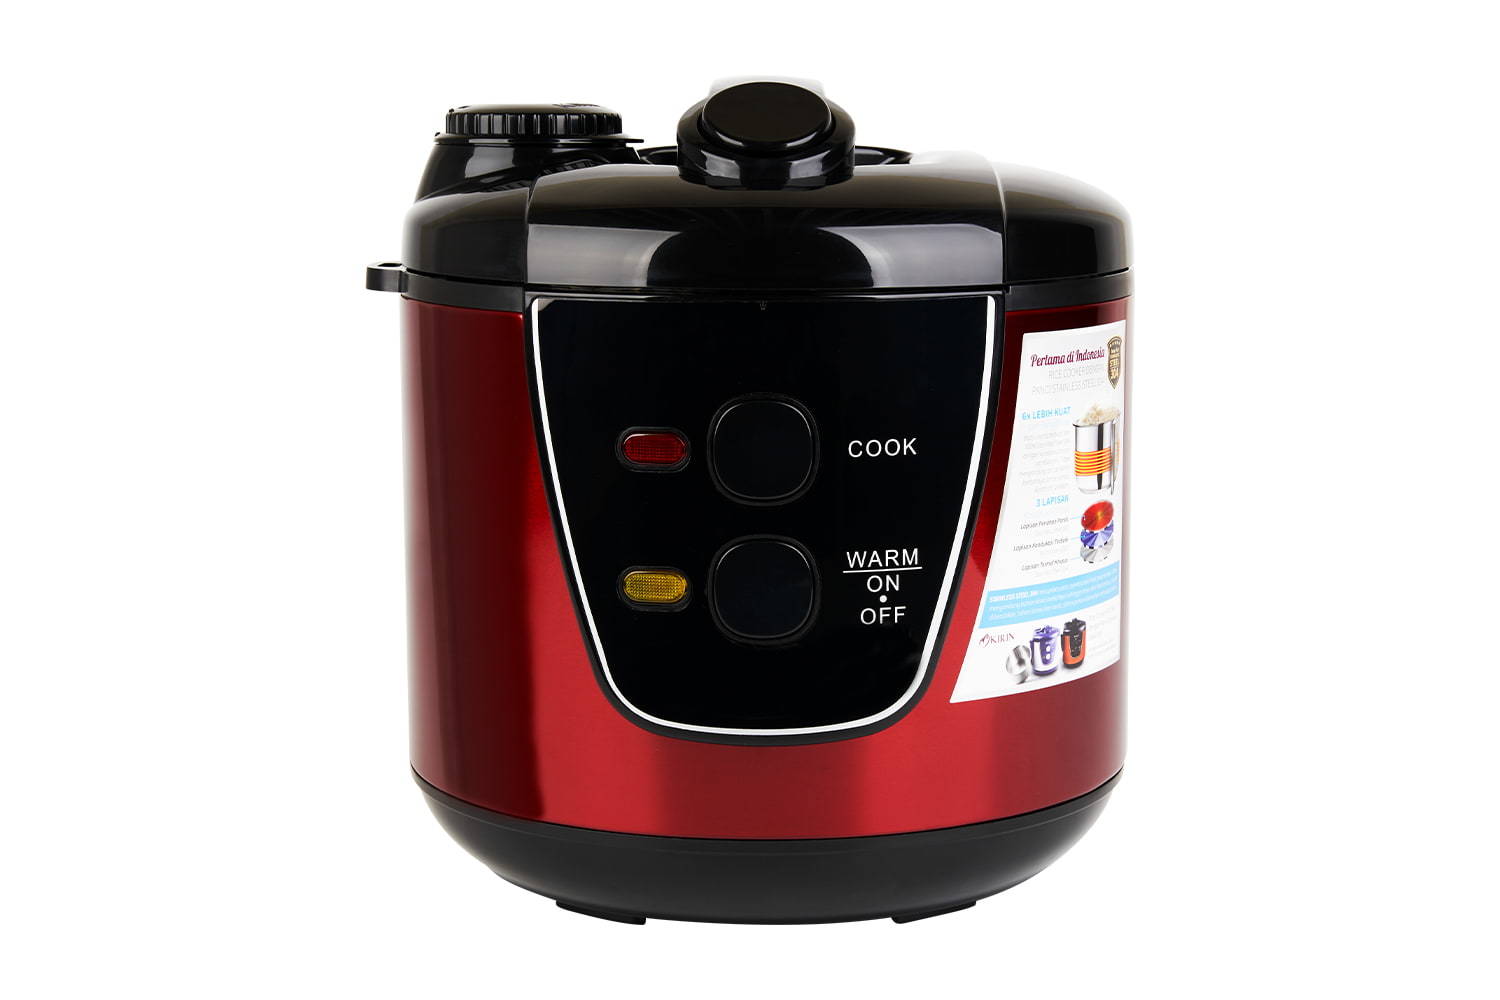 YYF-50YJ02 Rice Cooker,Simple operation, Nonstick inner Pot